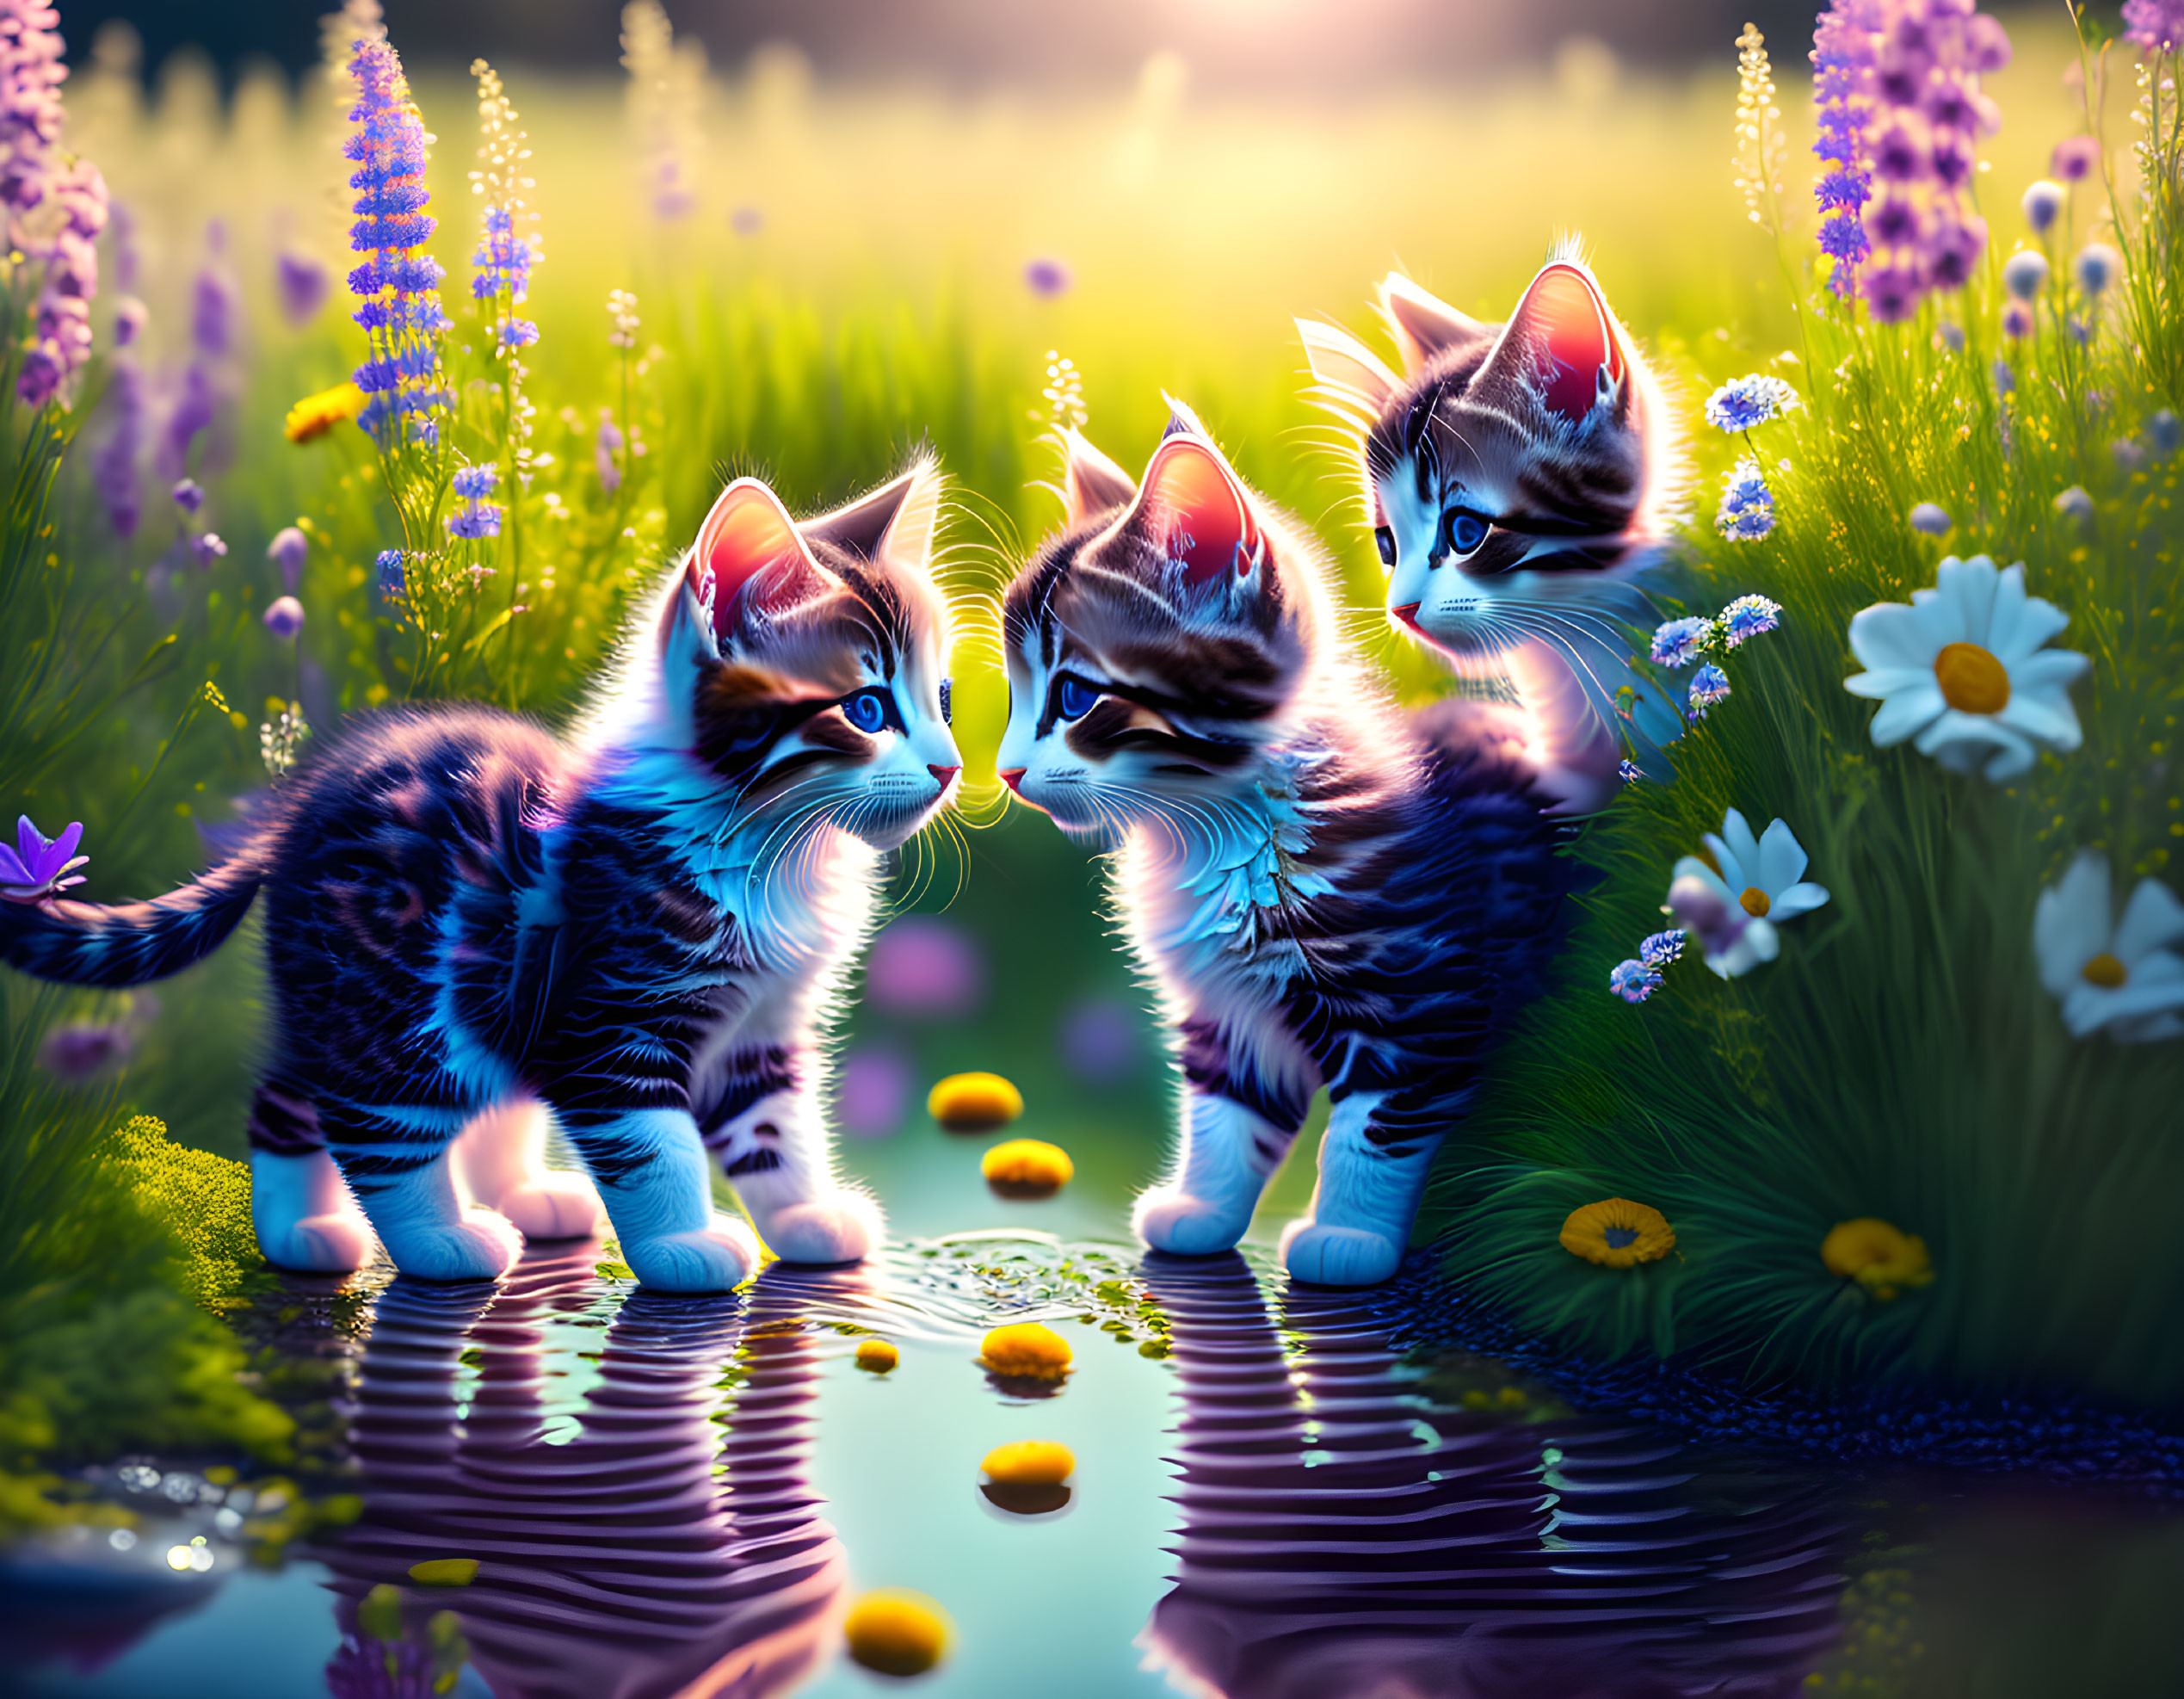 Three Kittens by Pond Surrounded by Colorful Flowers and Soft Lighting